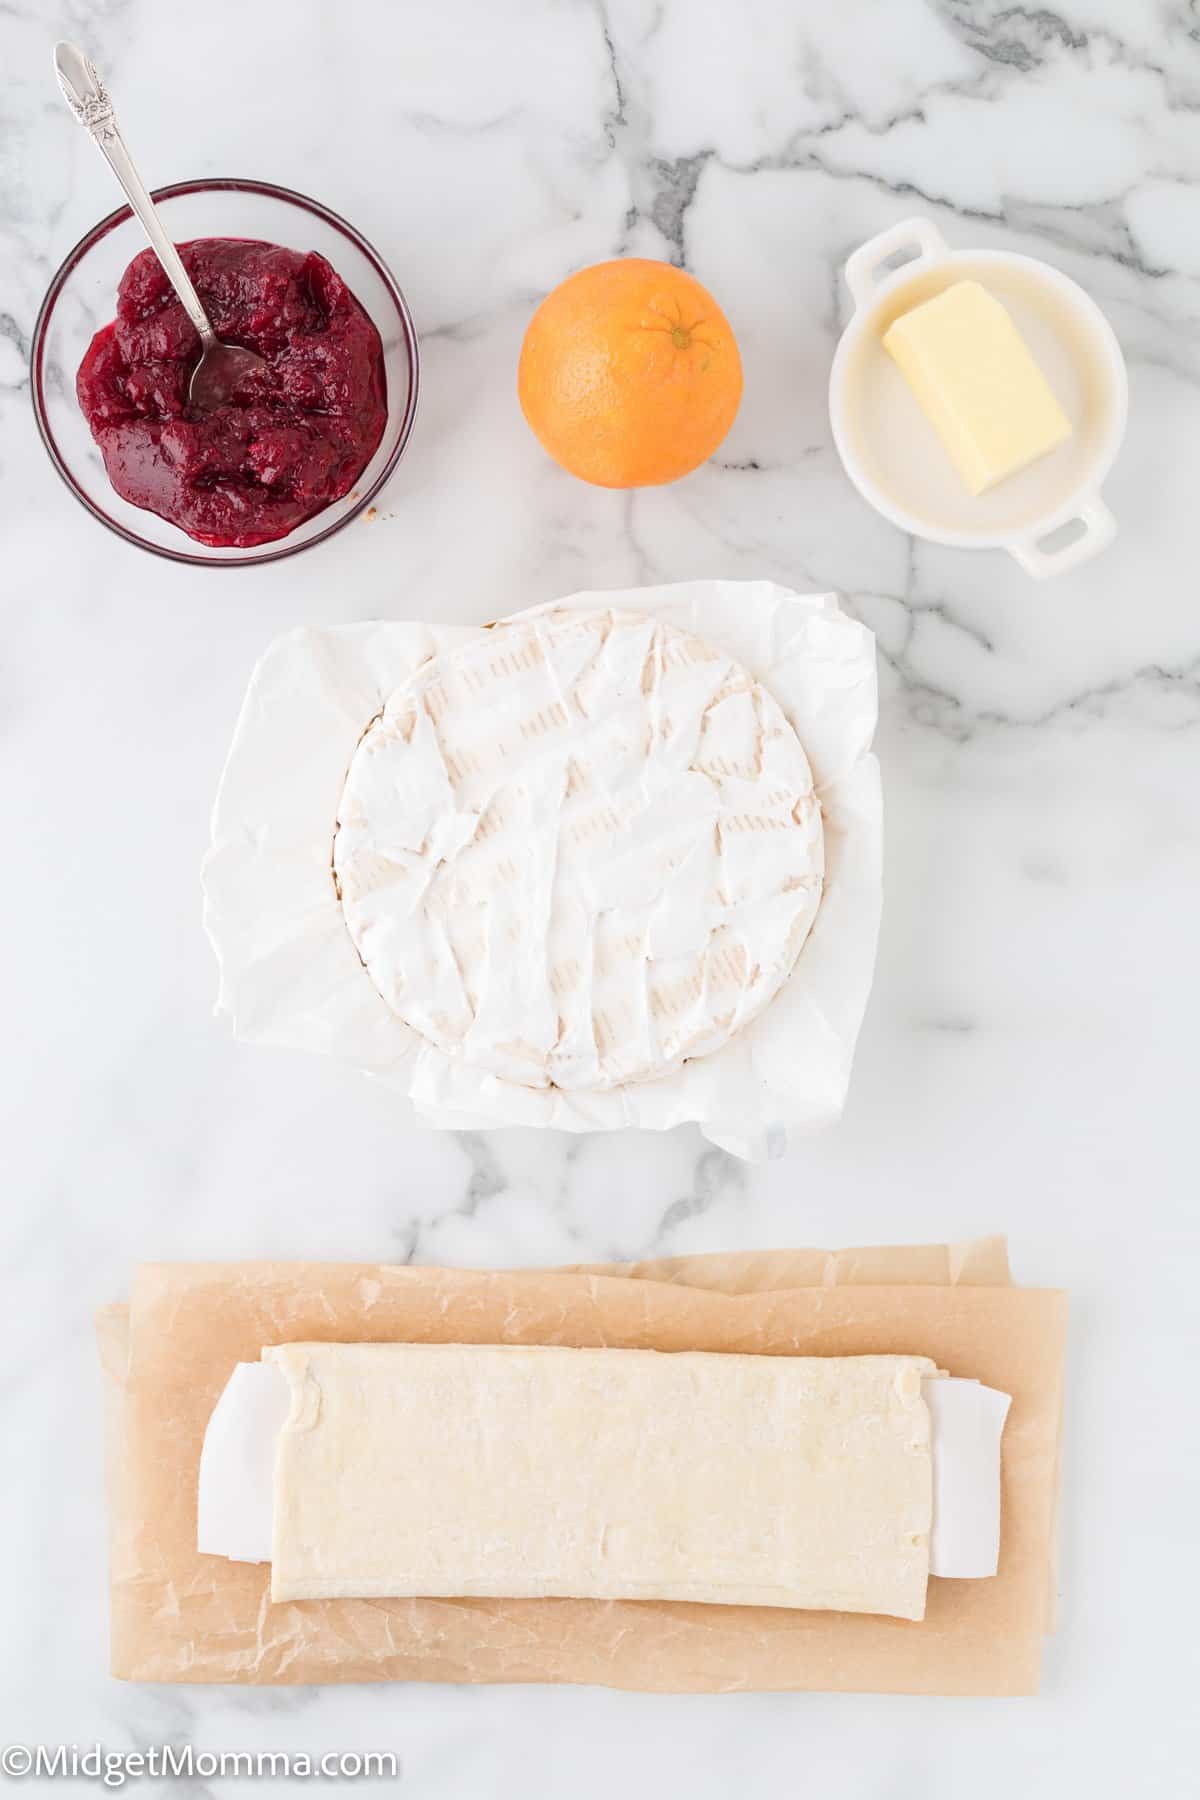 Cranberry Baked Brie ingredients